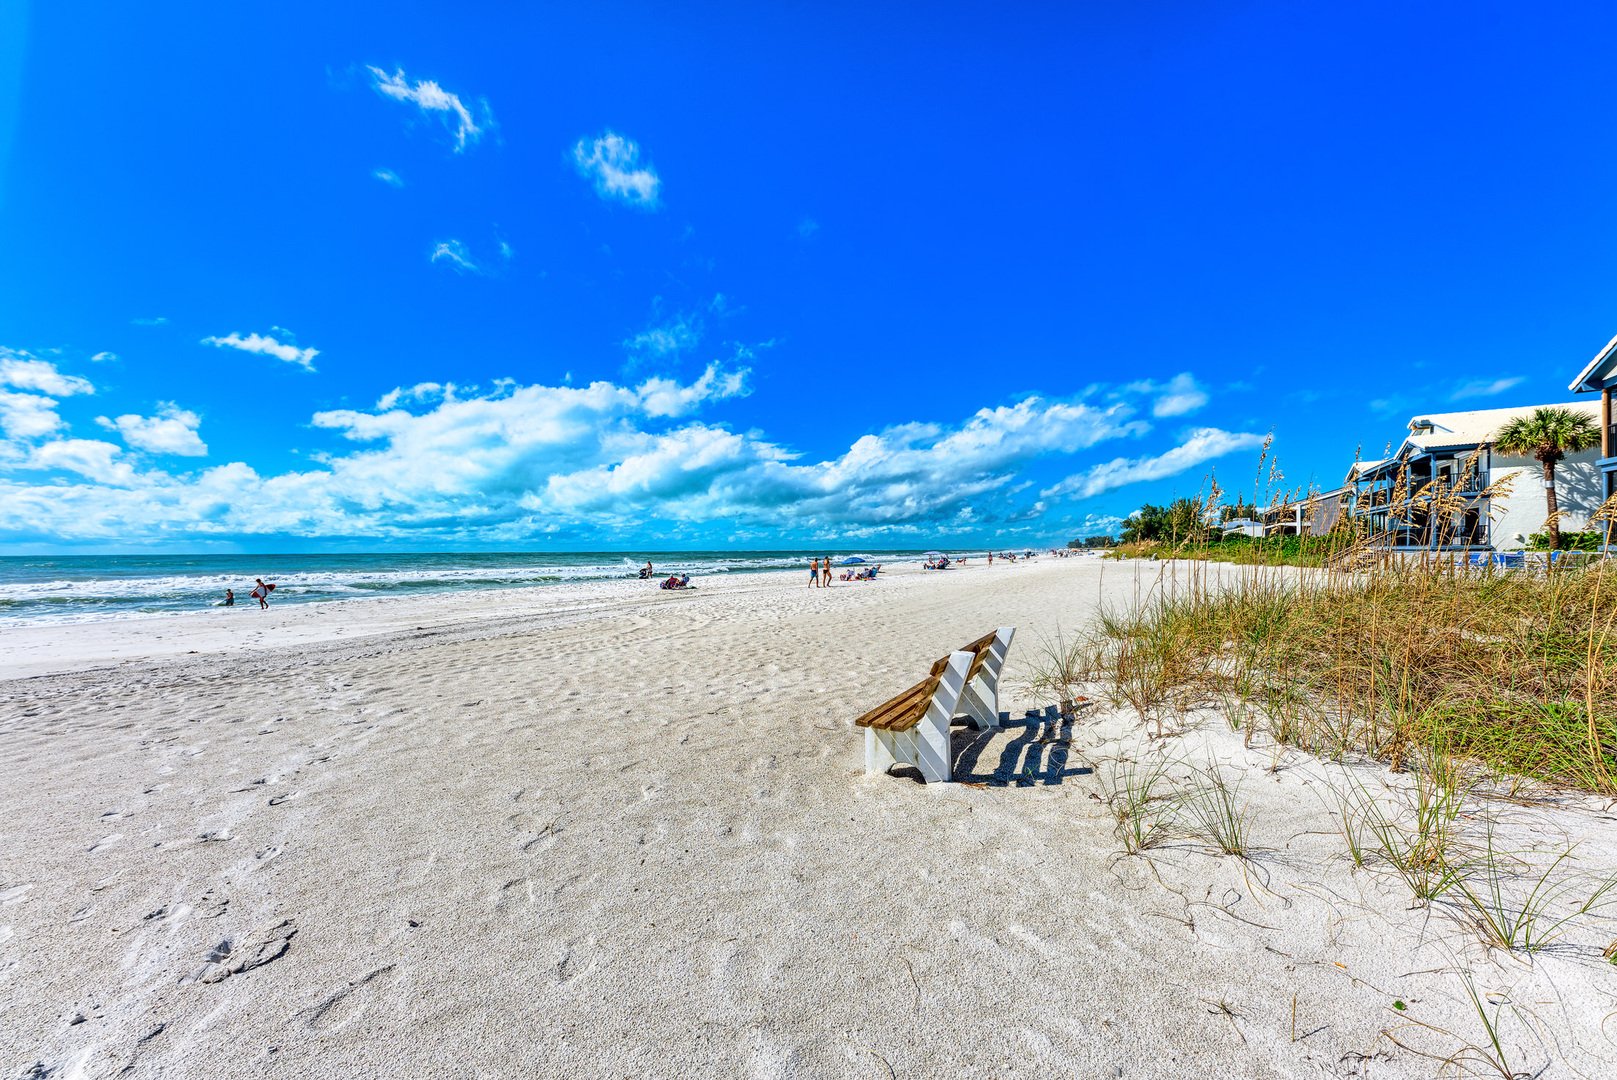 Enjoy beaches like this just steps from your rental on your Anna Maria beach journey.